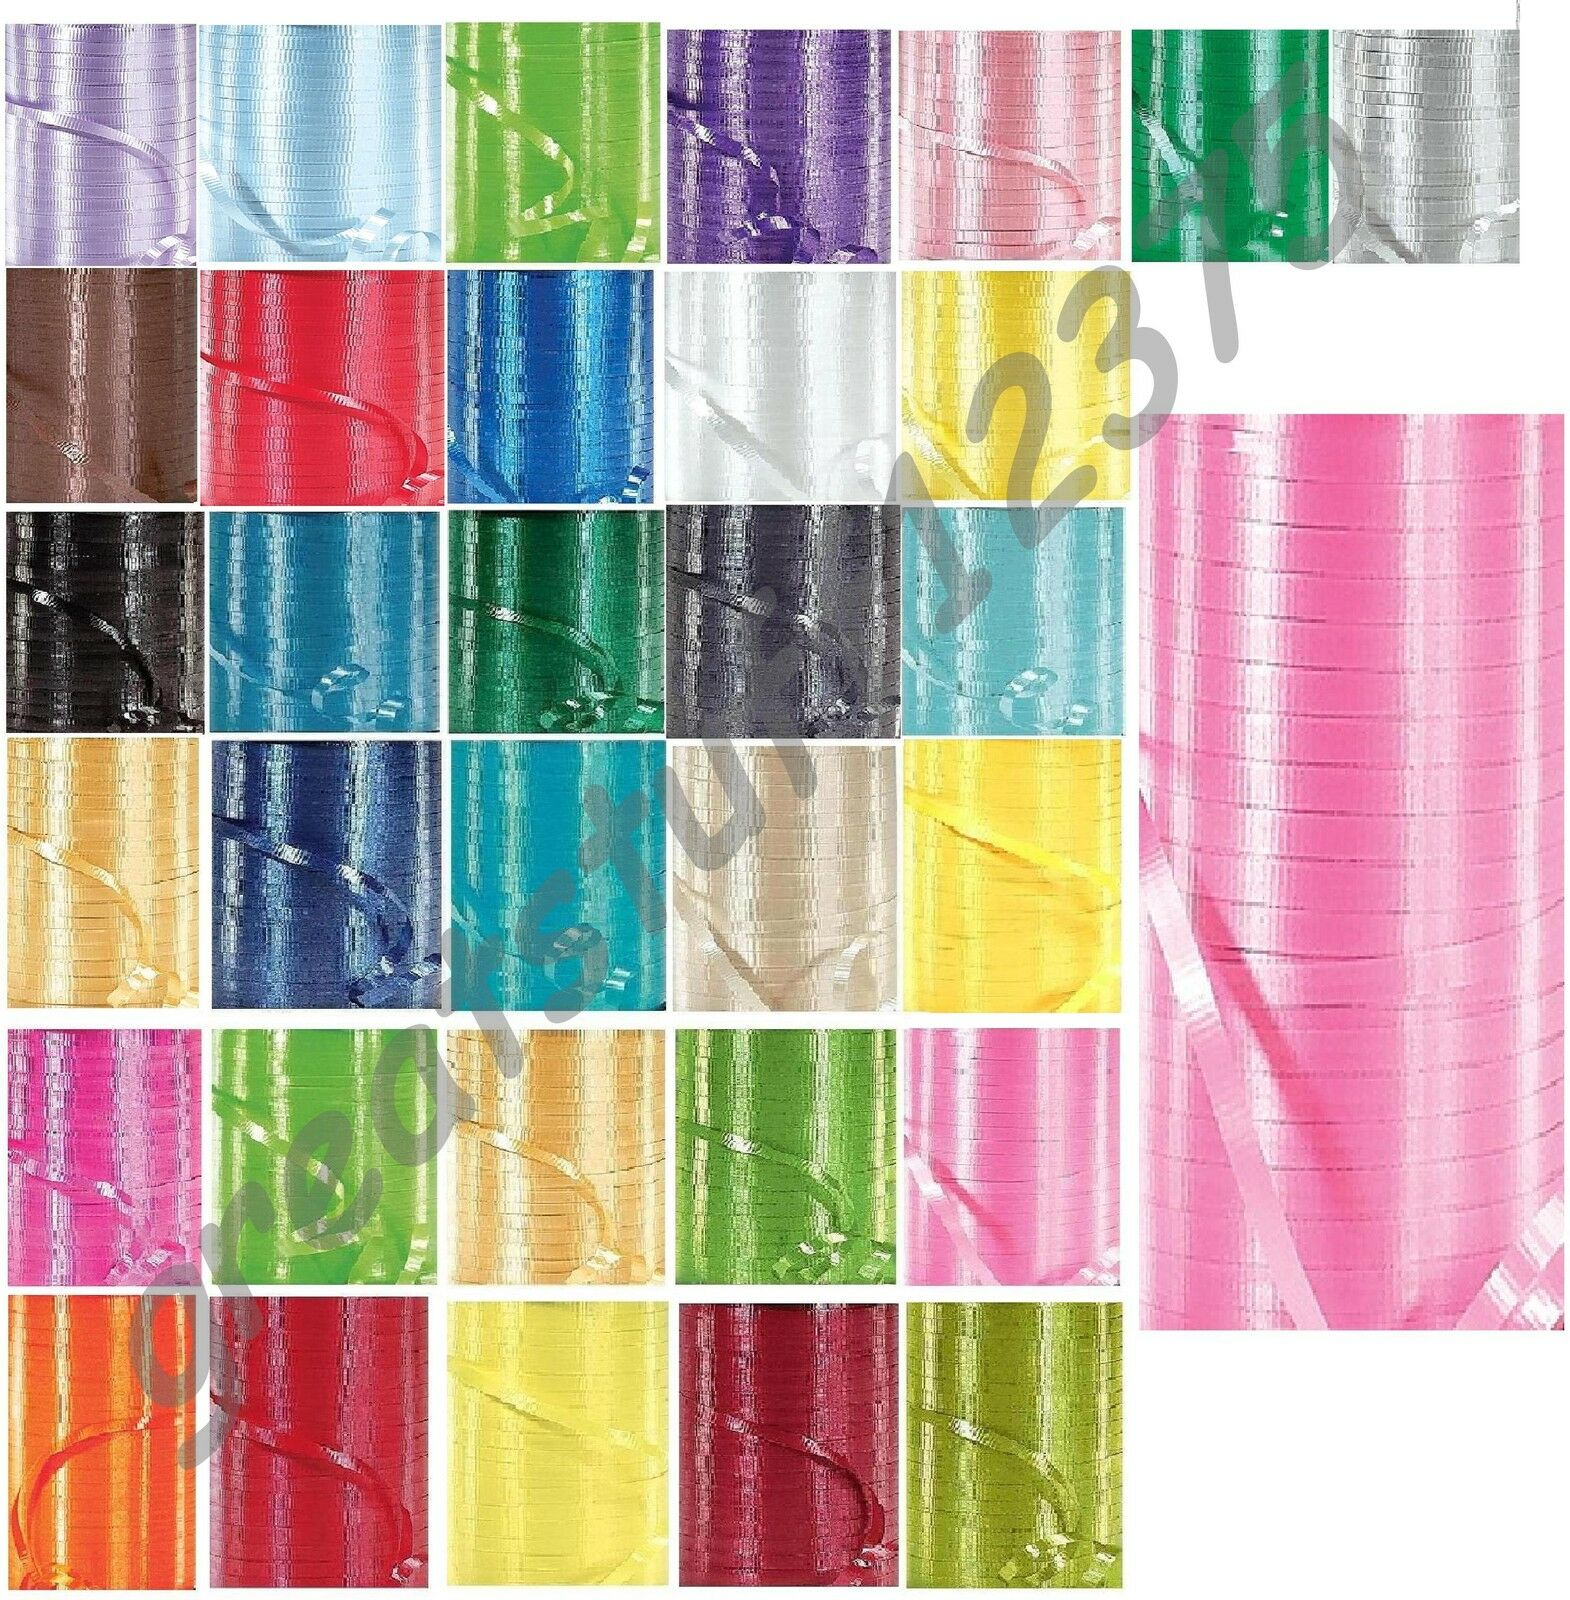 3/16" Curling Ribbon ( 60 Feet ) Balloons Party Supplies Crimped Gifts